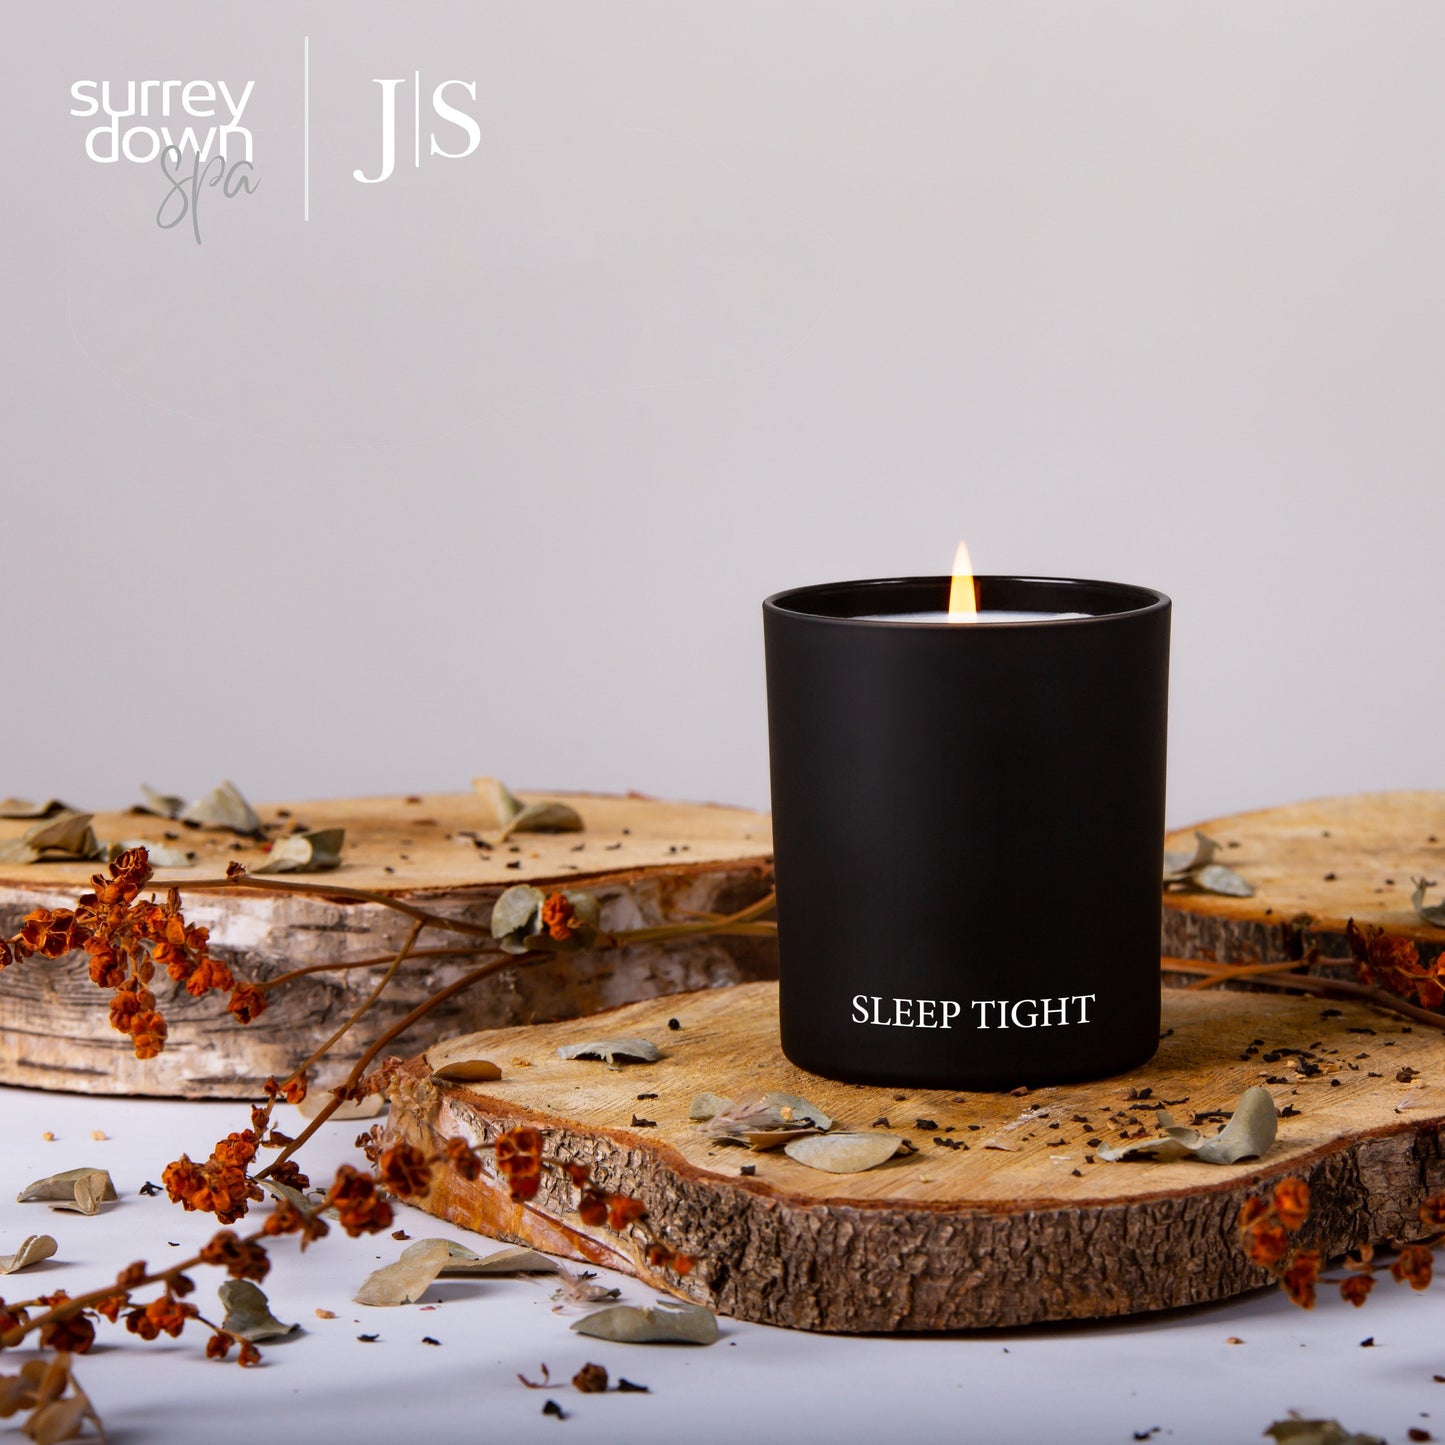 sleep tight candle on a wooden log